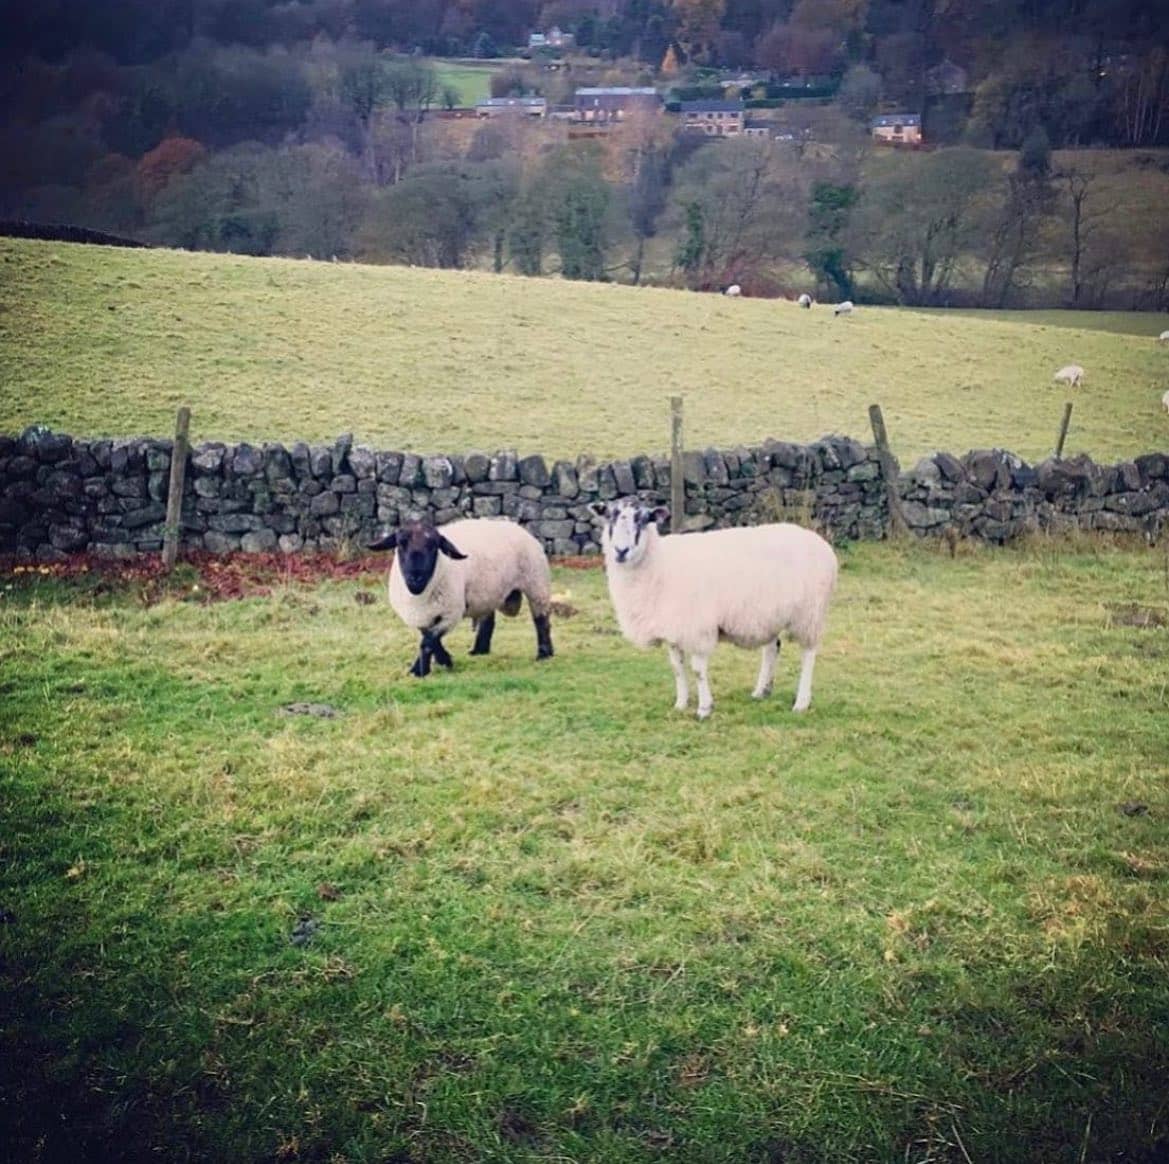 🐑 Wildlife Wednesday 🐑

We love seeing all kinds of four legged friends out and about, they’re ju...